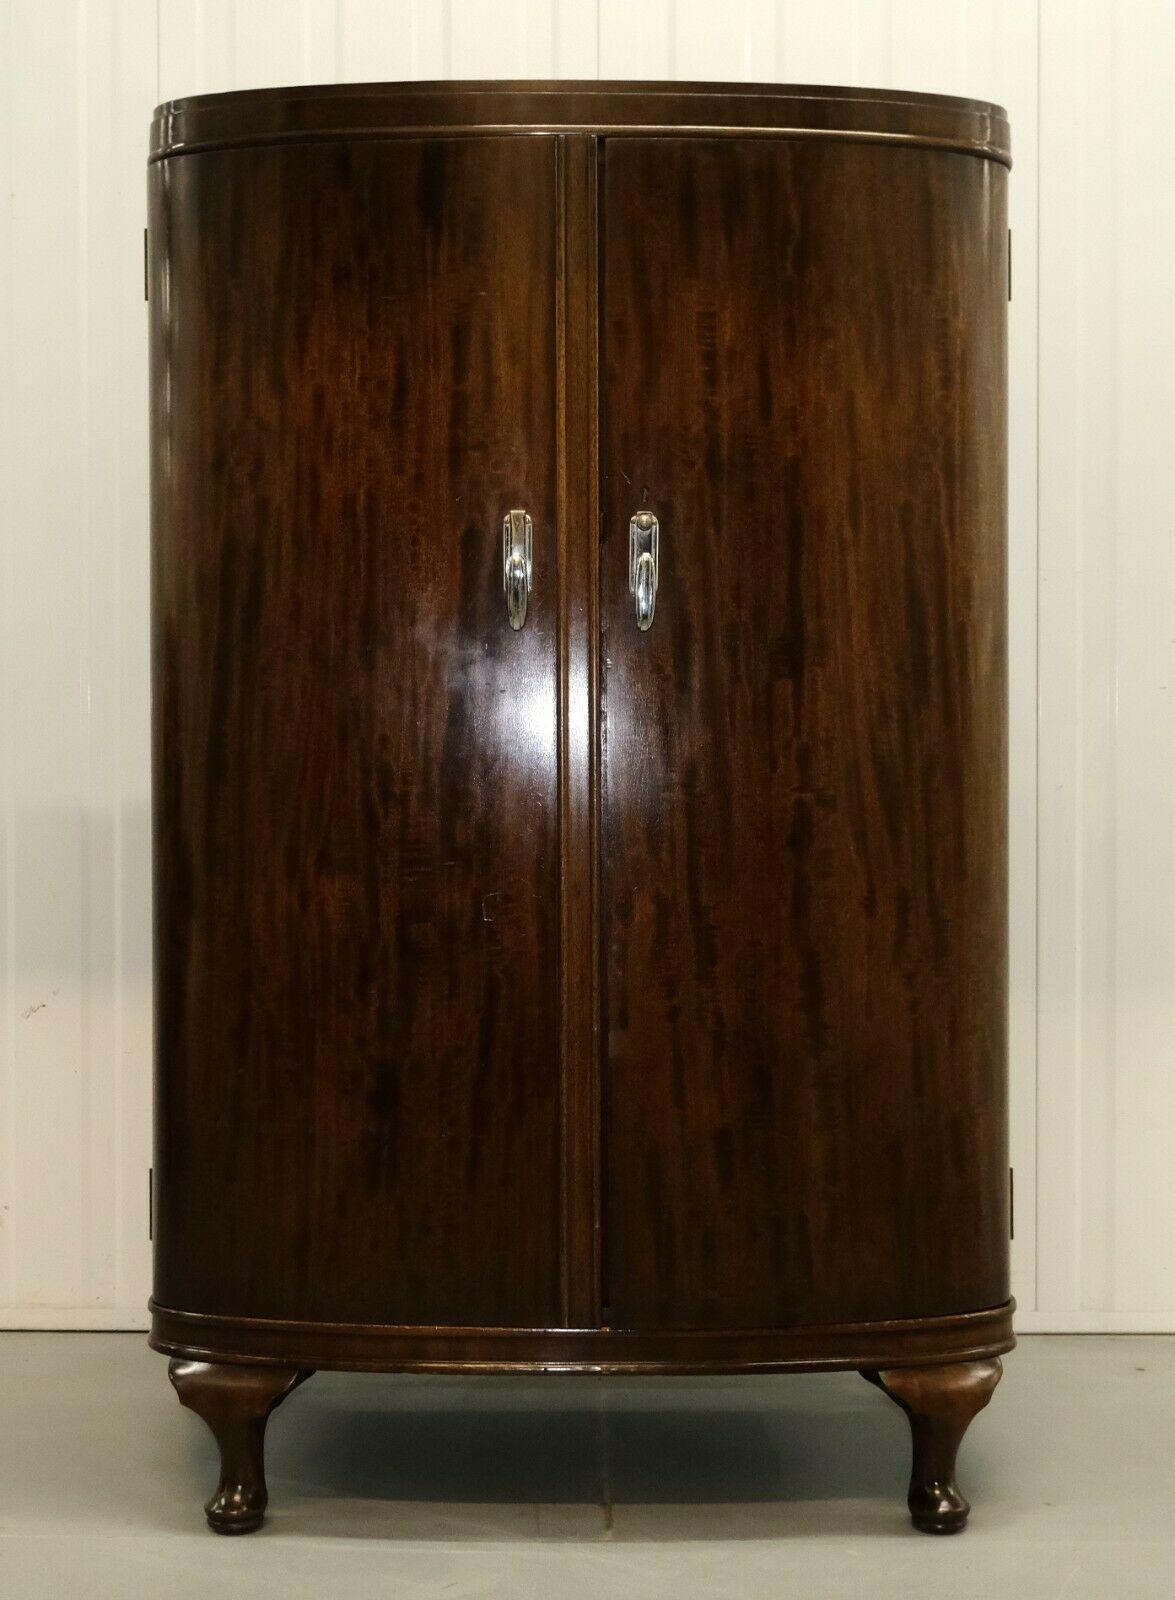 We are delighted to offer for sale this stunning Warring & Gillow Mahogany Ladies Wardrobe with bow front and shelves.

This charming item shows elegance with the bow front doors and four cabriole legs making it unique from other furniture. Its